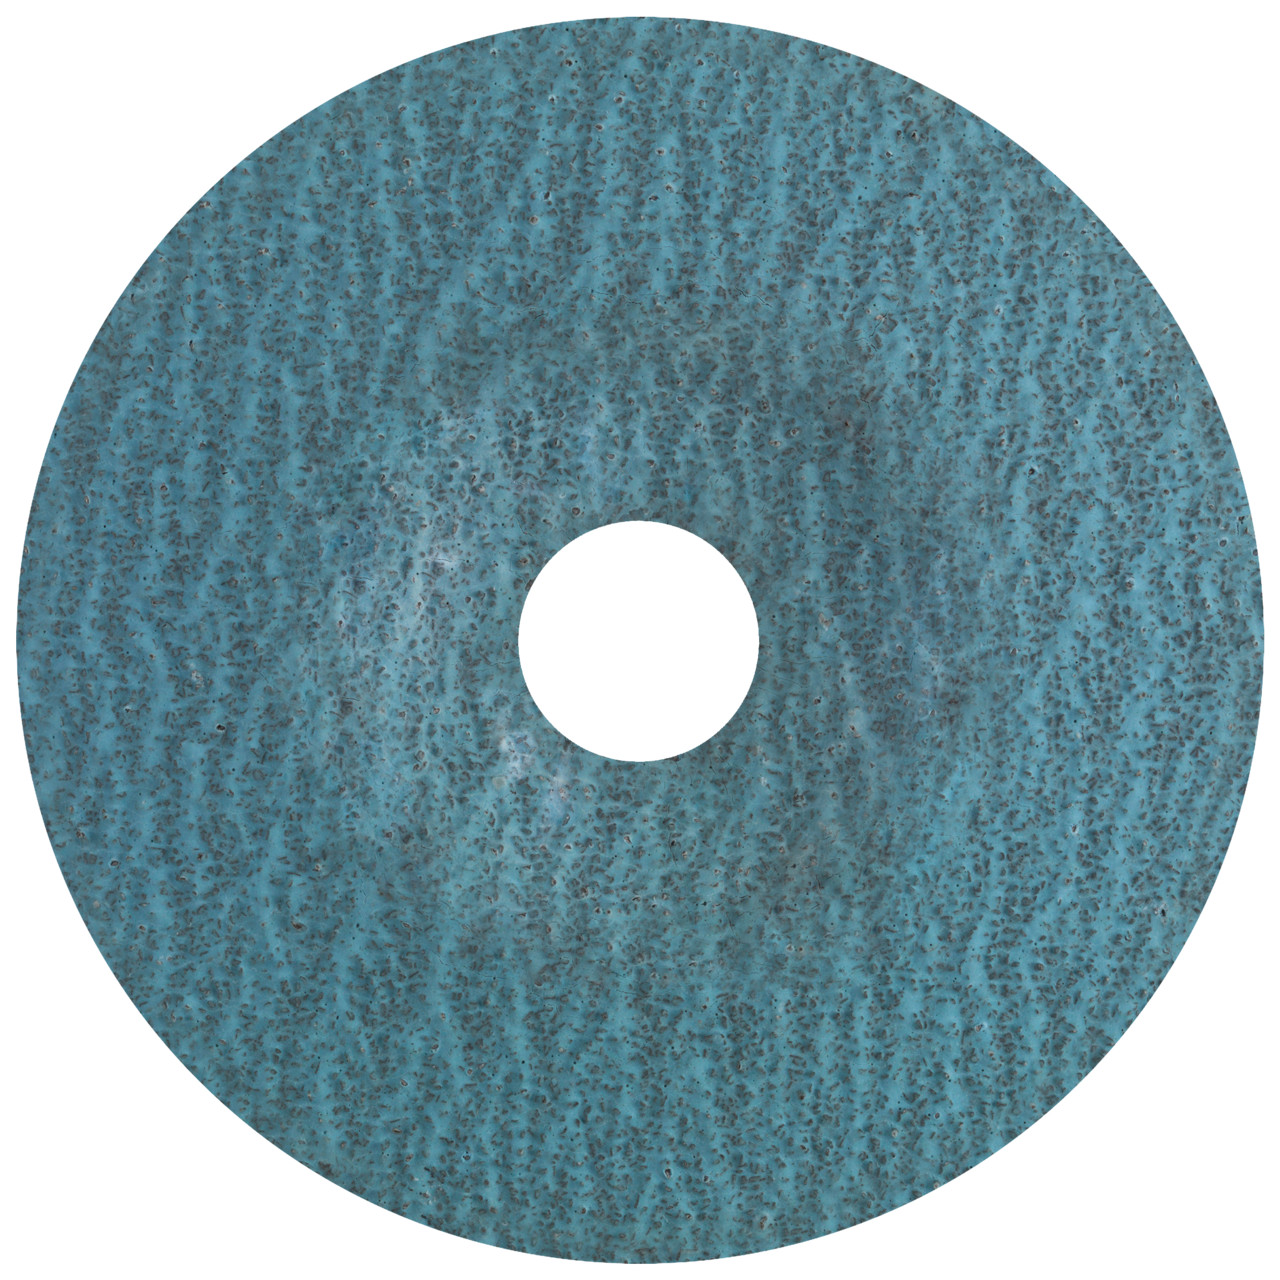 Tyrolit ZA-P48 N NATURAL FIBRE DISC DxH 115x22 For steel and stainless steel, P36, form: DISC, Art. 706128